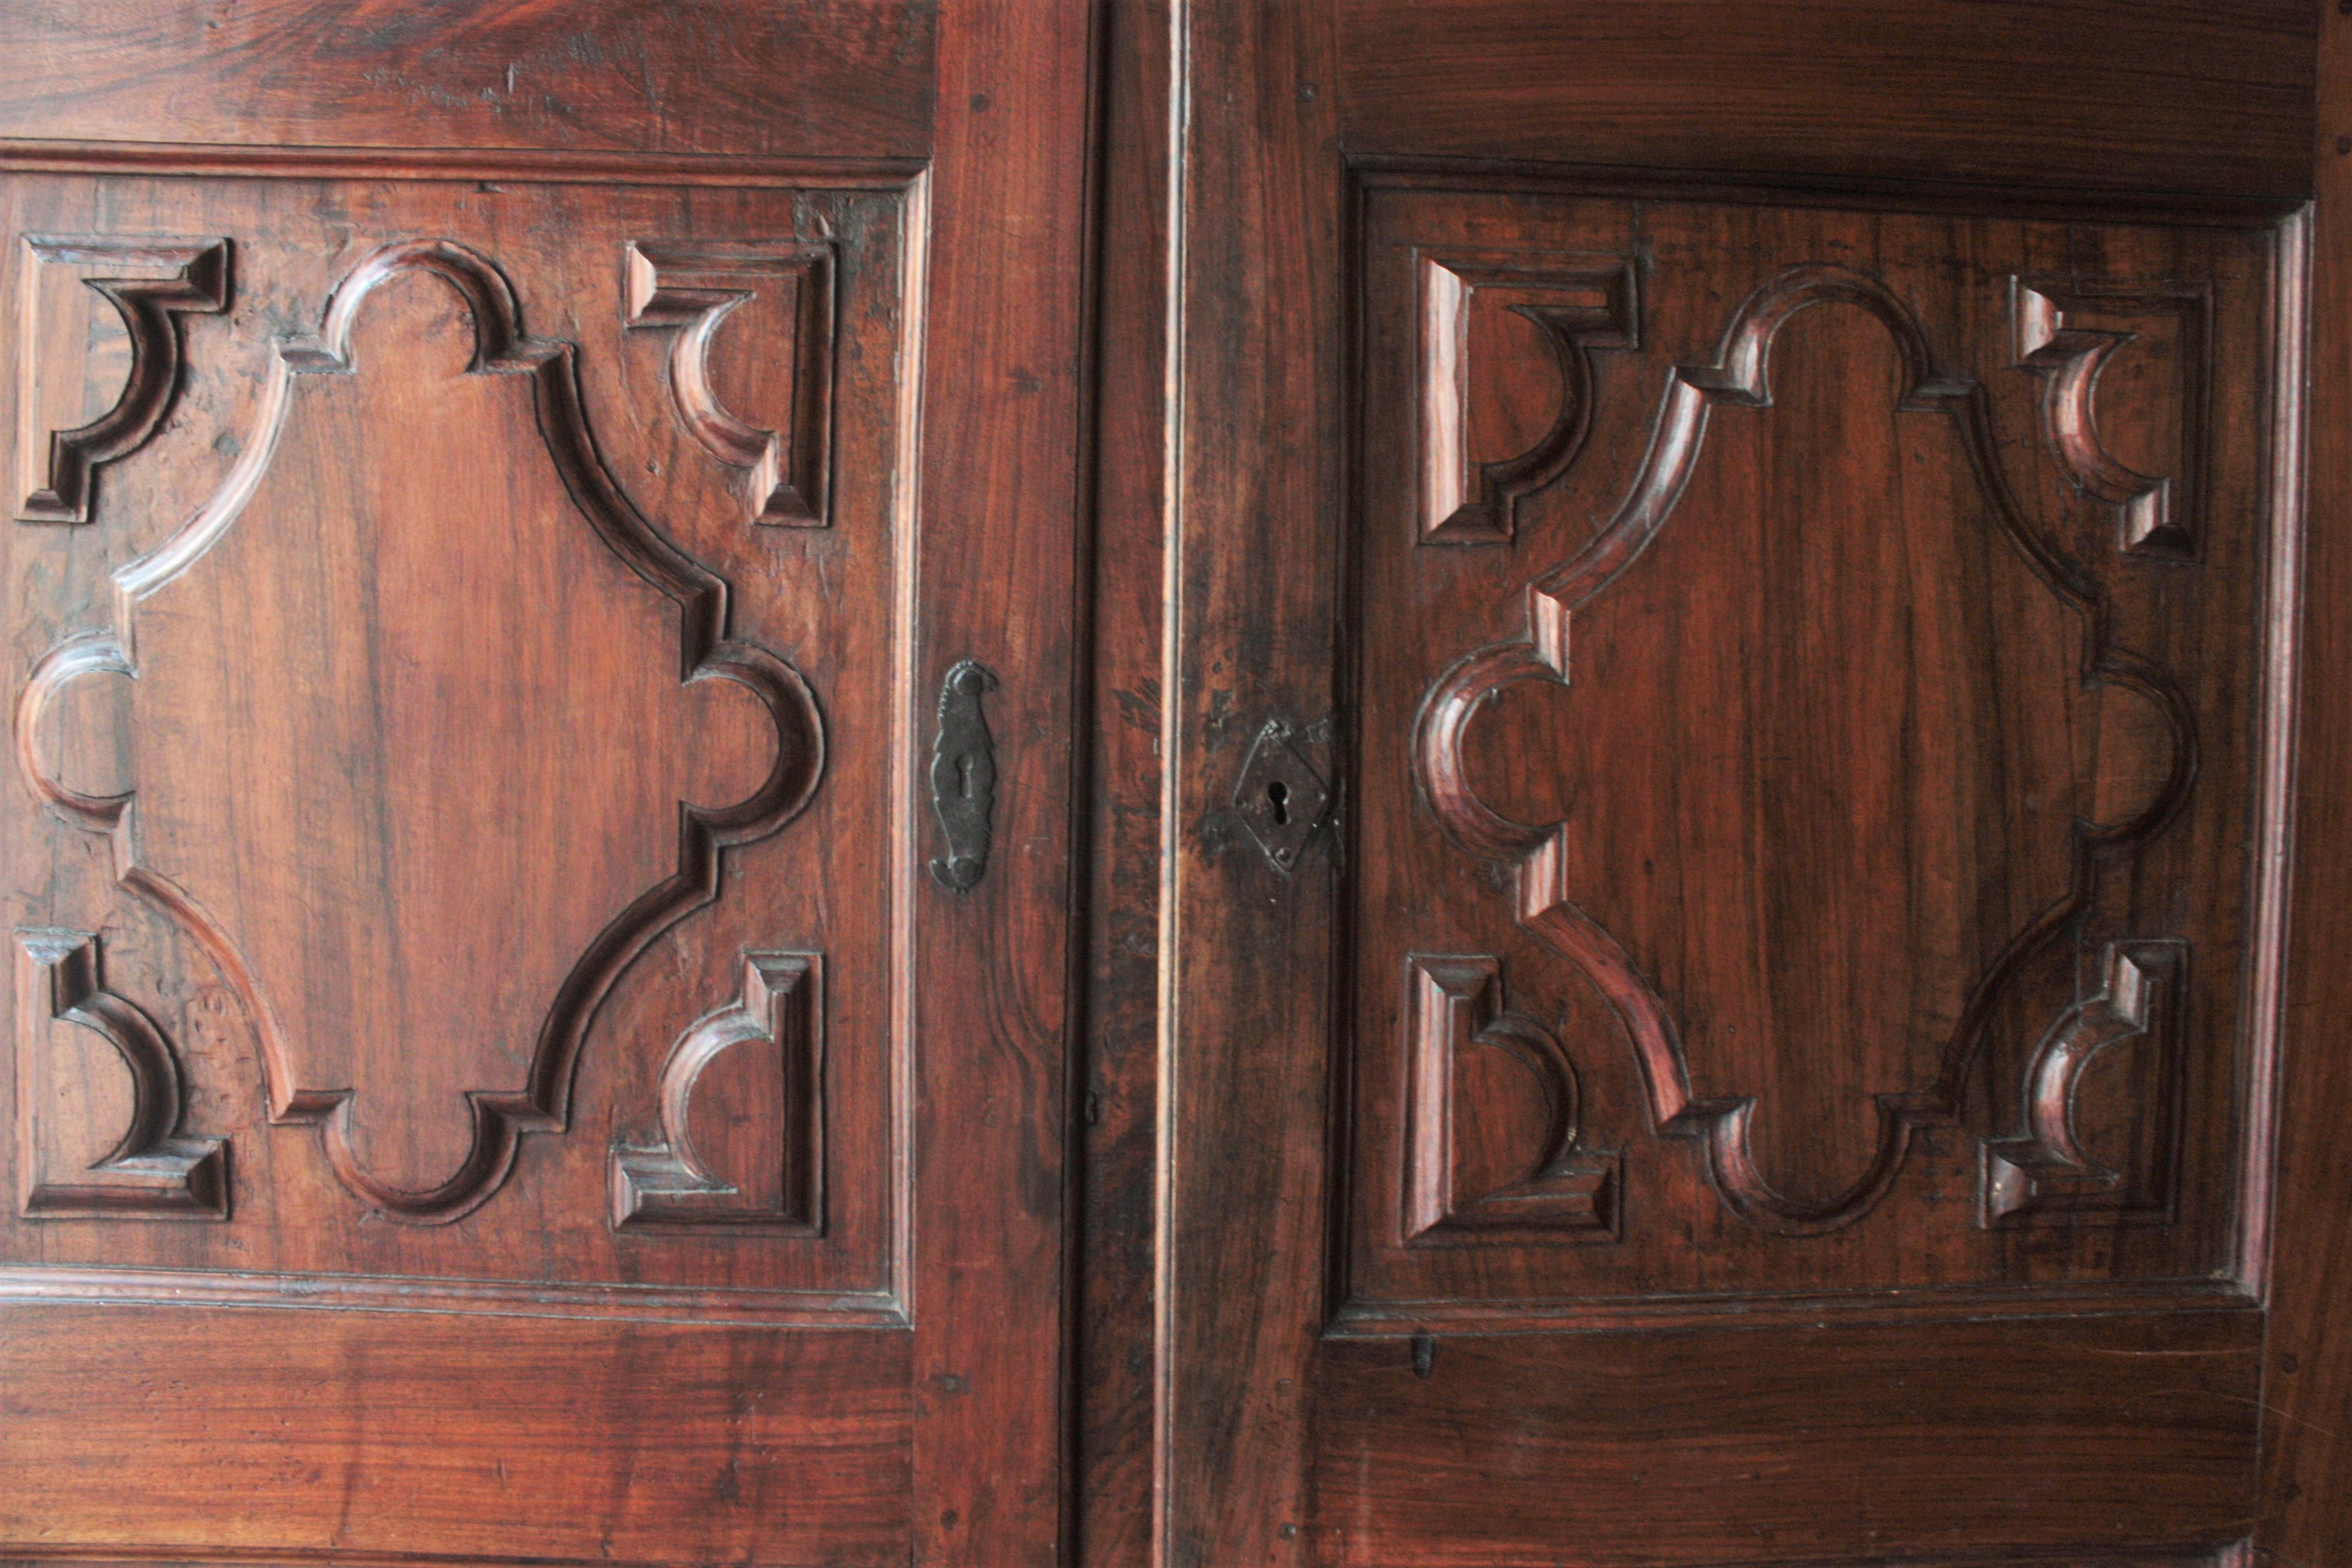 Special listing for US client: We are selling left side door.

Outstanding carved wood armoire doors. Spain, 18th century.
Beautiful displayed as a wall decoration or as custom made doors in a main room. Also interesting to be used as doors in a